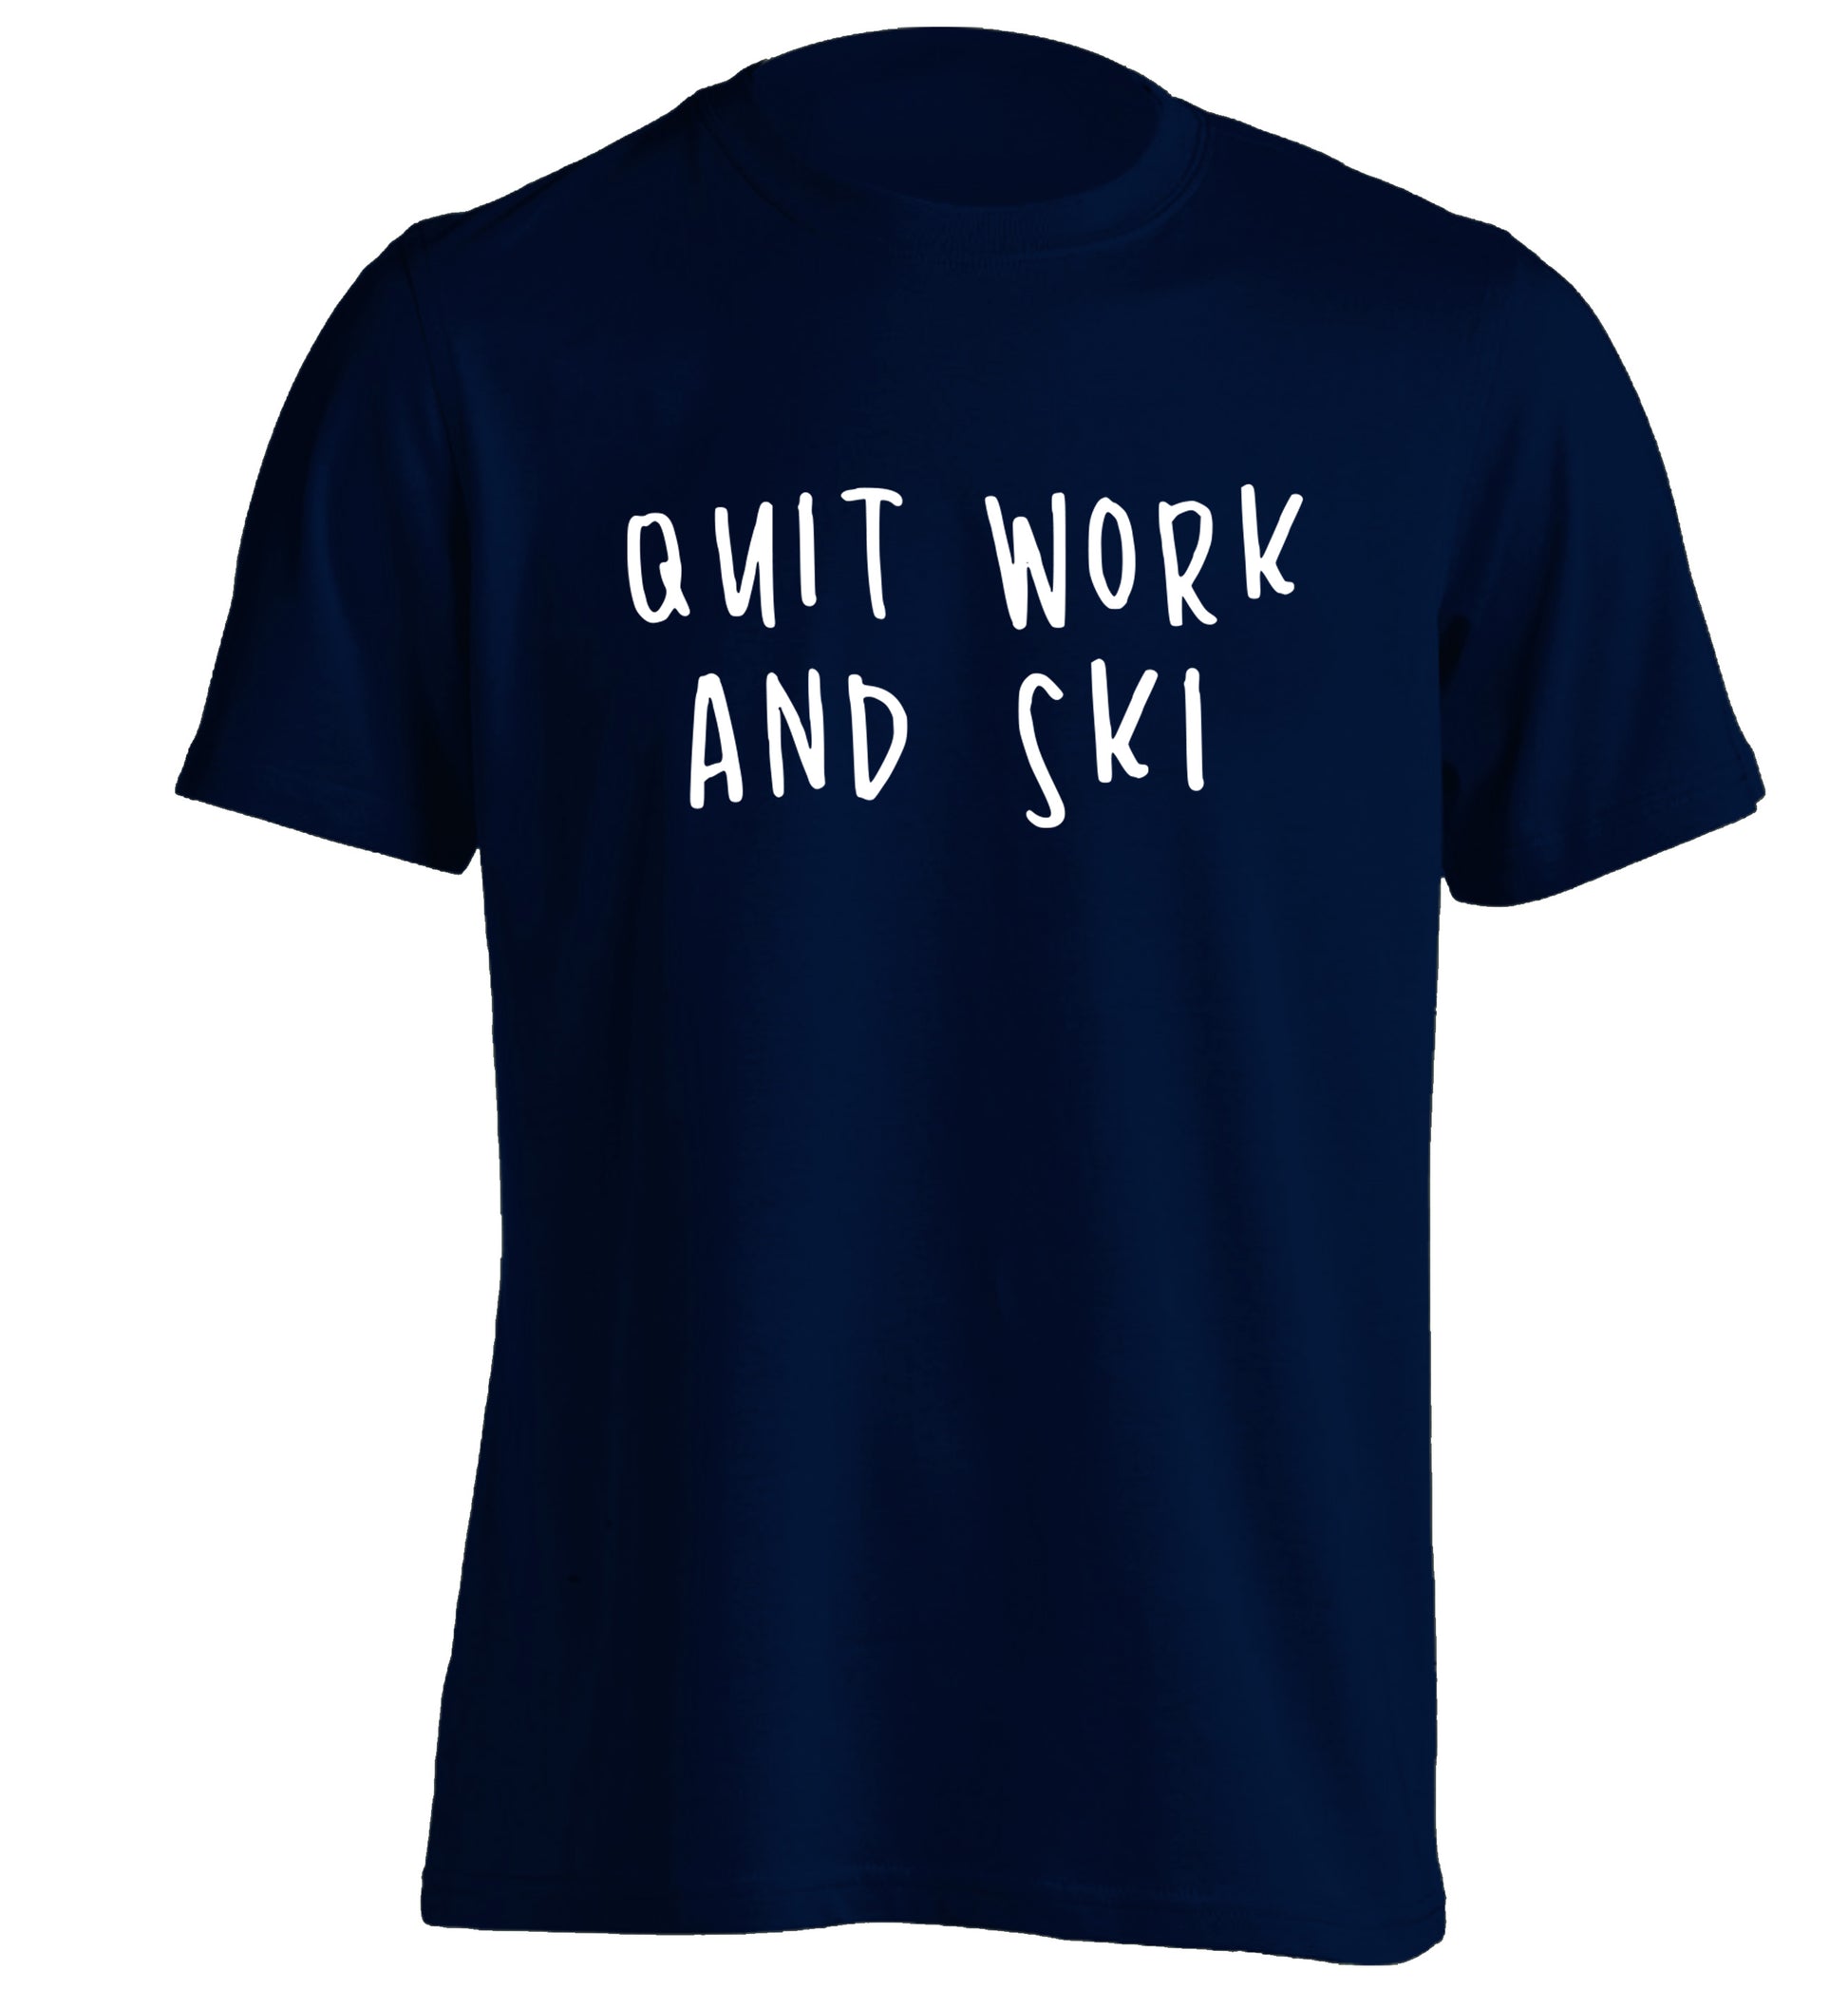 Quit work and ski adults unisexnavy Tshirt 2XL